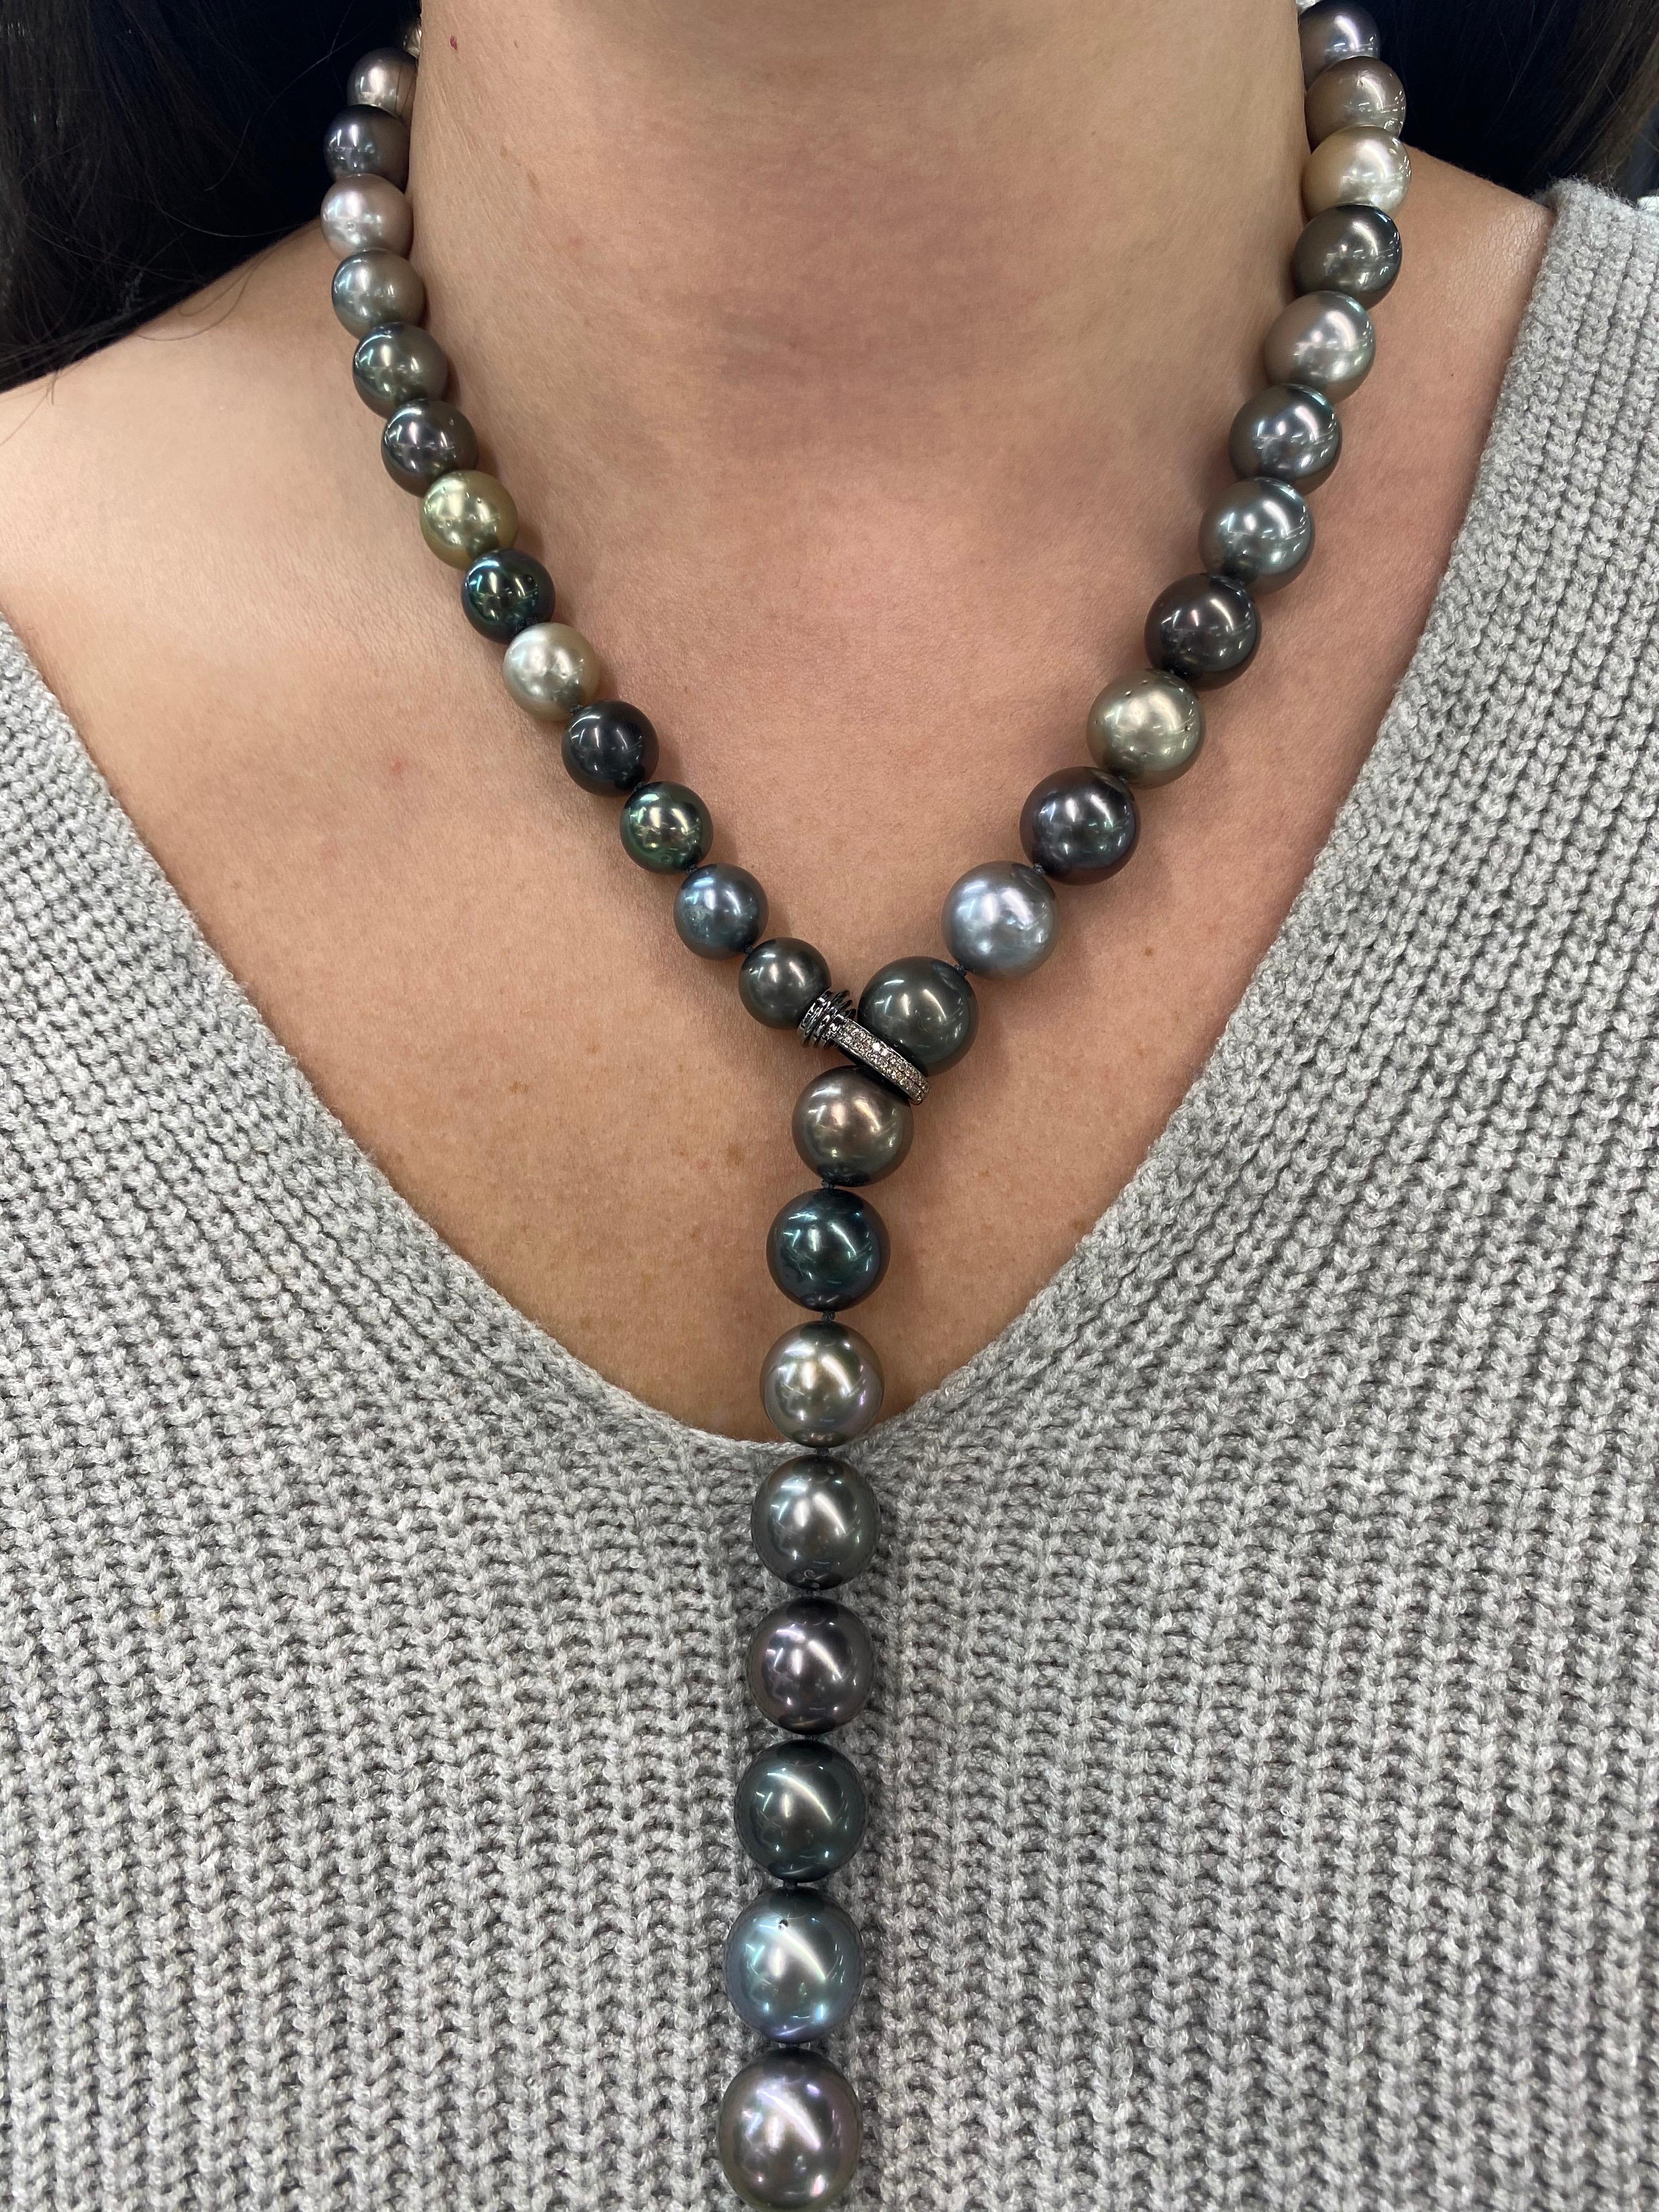 Chic South Sea Tahitian Pearl necklace featuring 36 pearls measuring 10.4-12.5 mm and a diamond front clasp. 
Pearl quality: AAA
Pearl Luster: AAA Excellent
Nacre : Very Thick

Strand can be made to order, shortened or longer. Clasp can be changed,